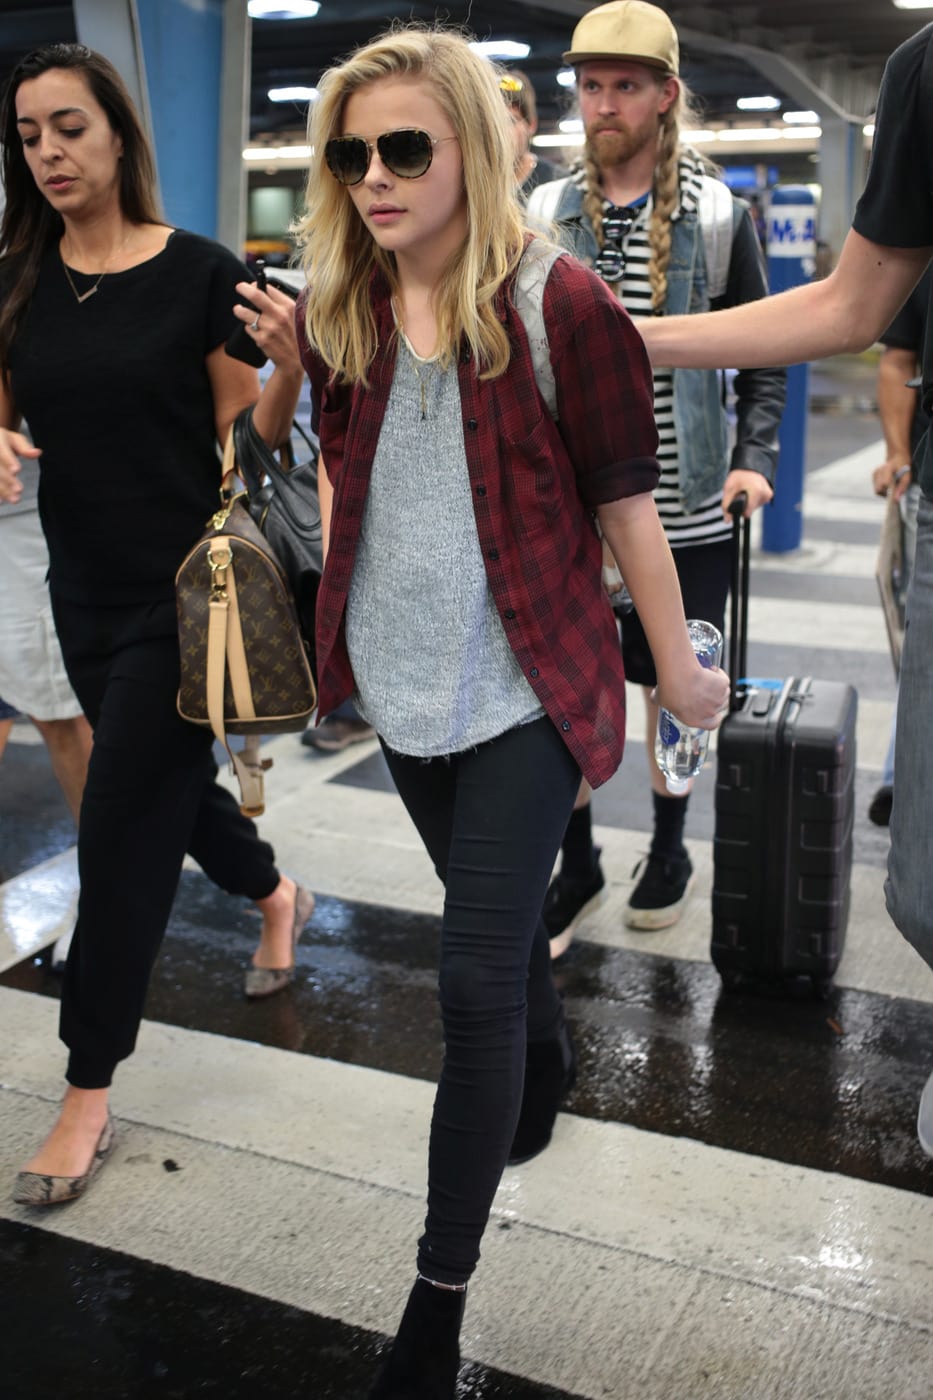 A Week in Her Style: Chloë Grace Moretz - College Fashion